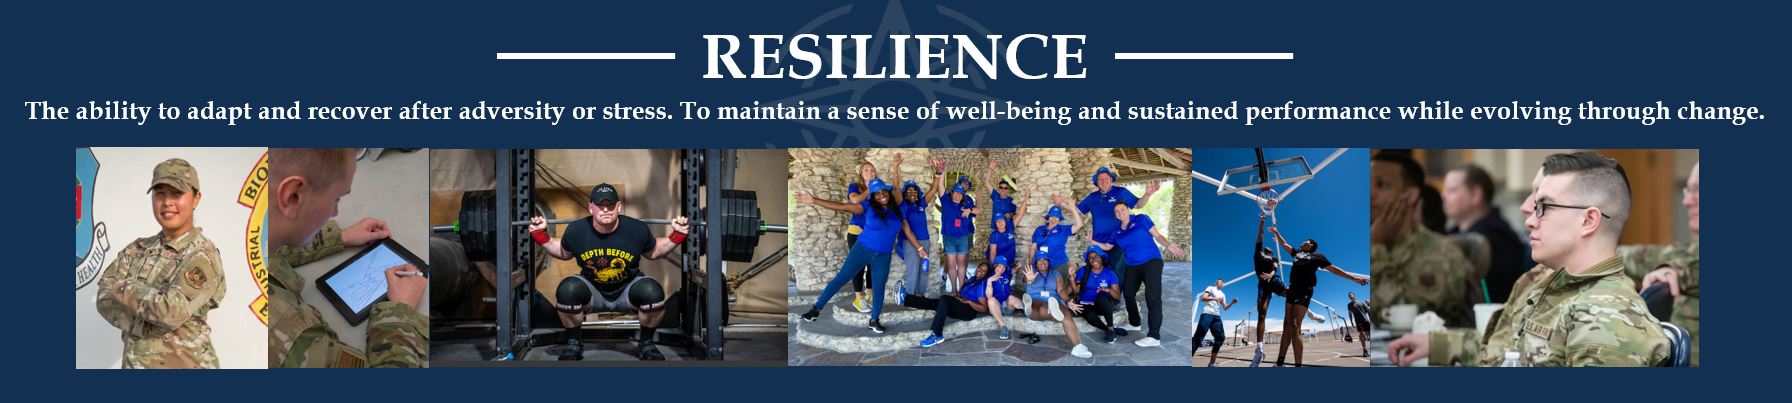 Resilience web page header graphic